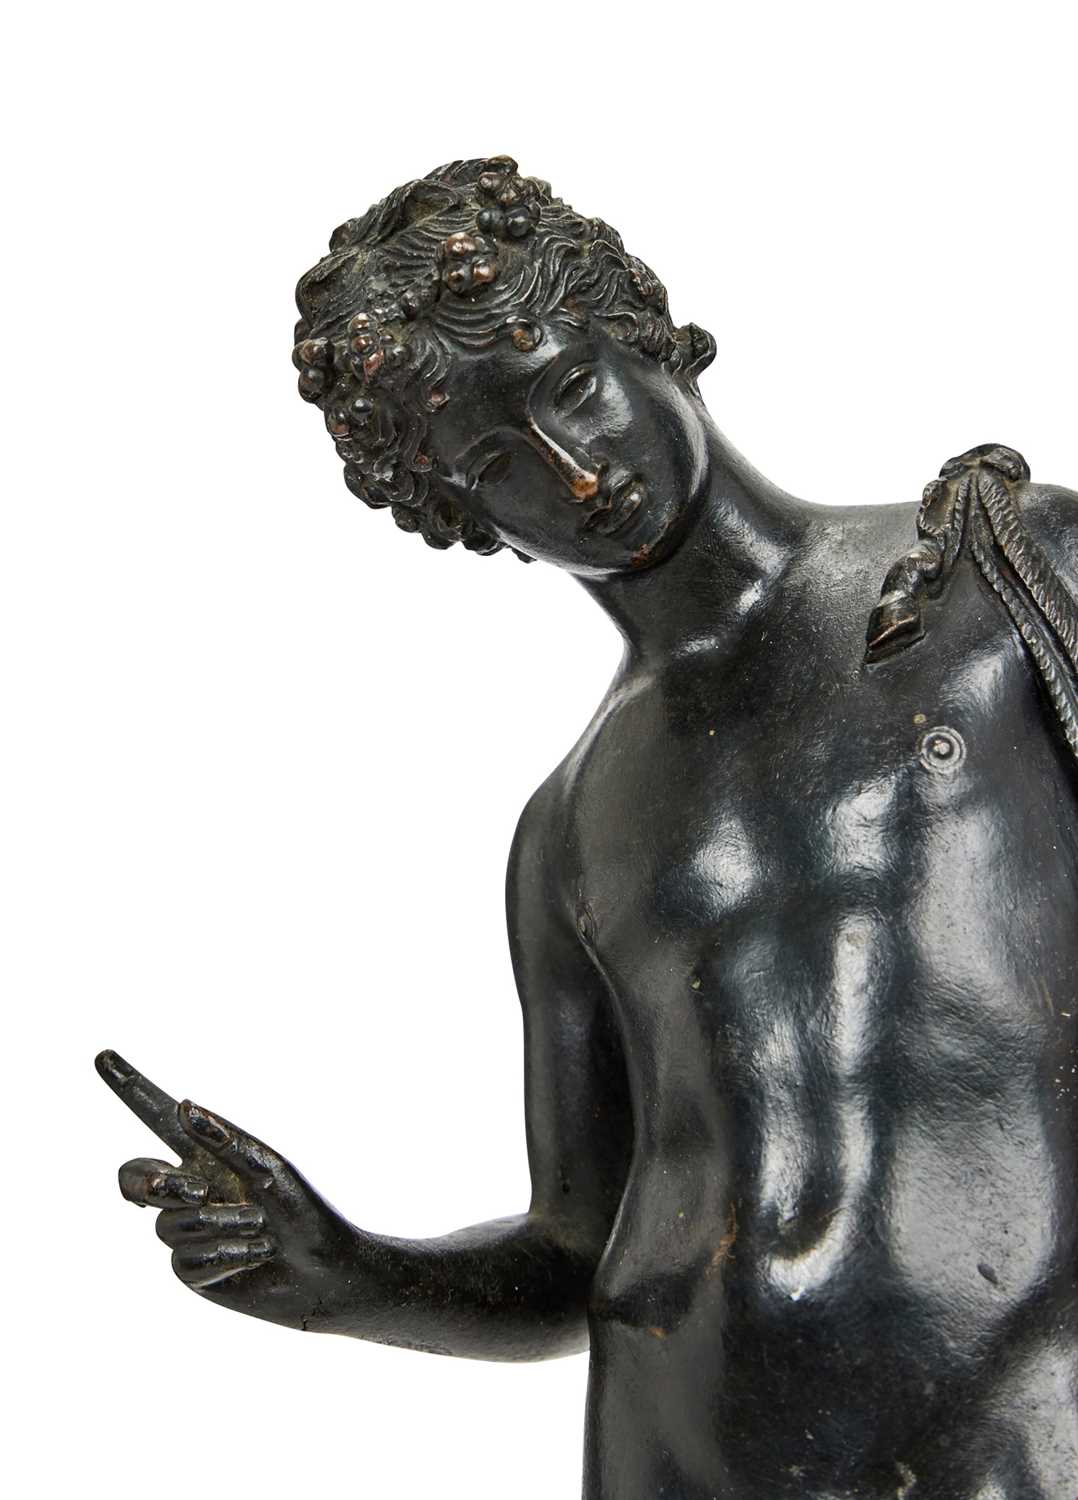 A LATE 19TH CENTURY NEAPOLITAN BRONZE OF NARCISSUS, AFTER THE ANTIQUE - Image 3 of 3